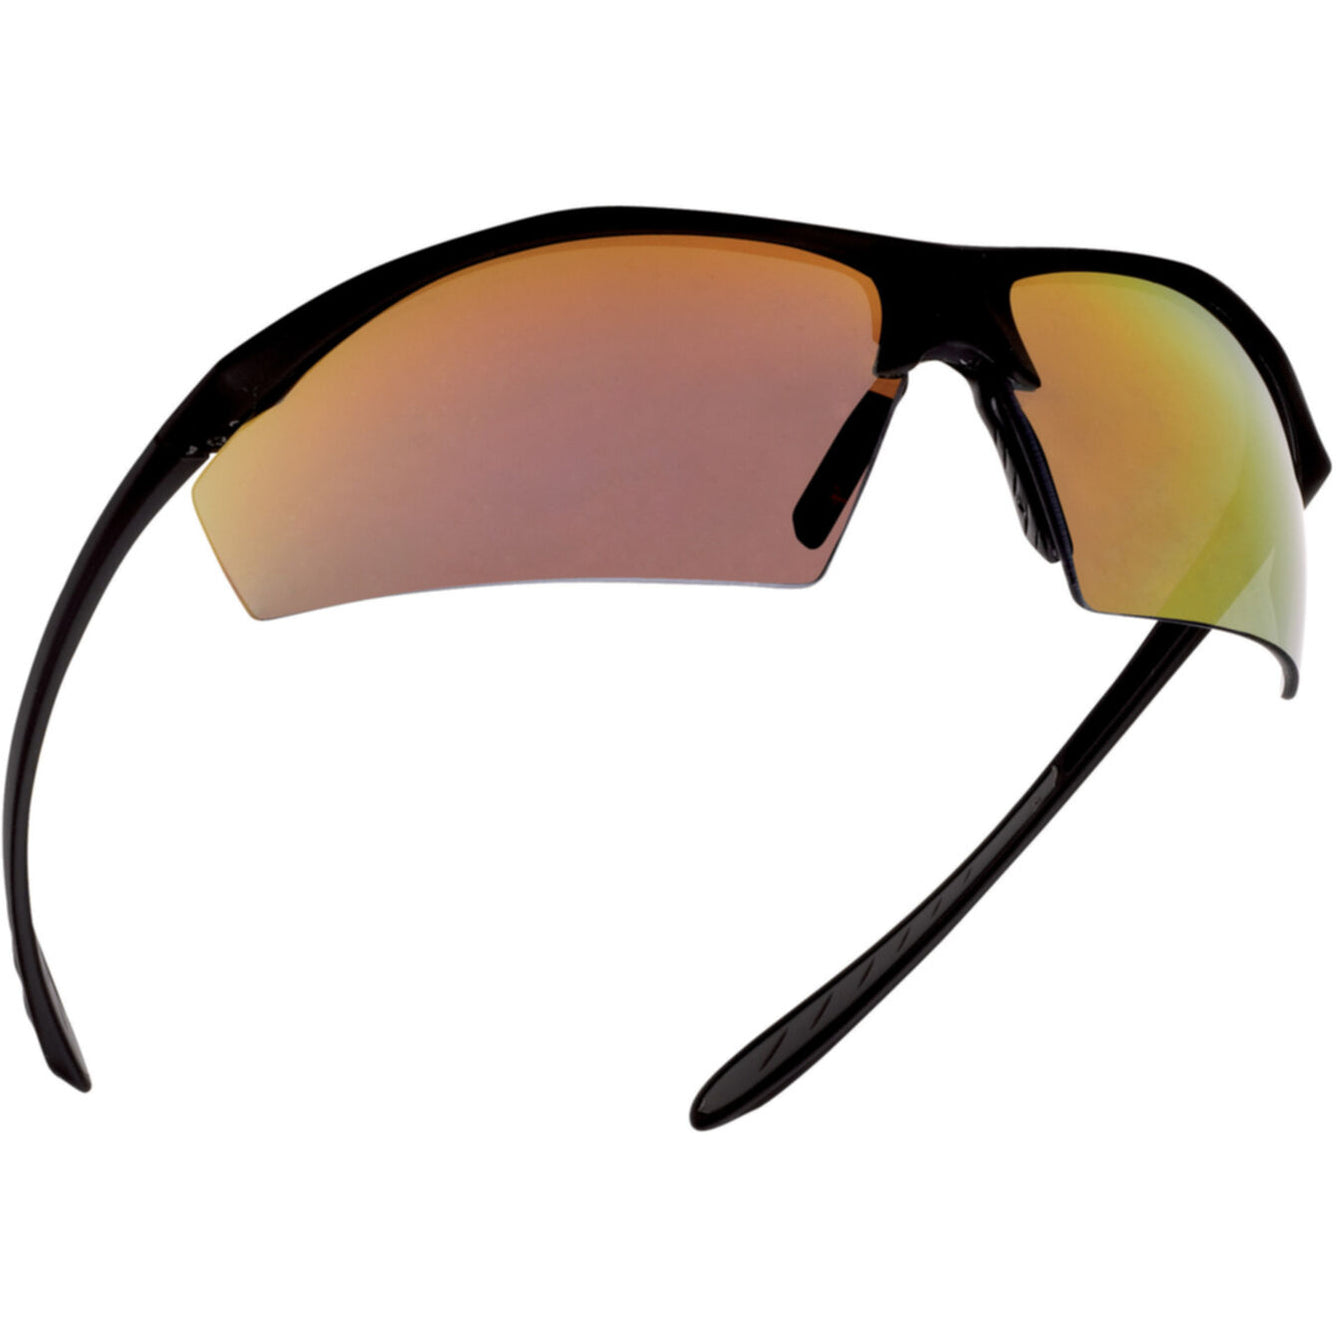 Bolle Safety - SENTINEL - Fire flash ballistic glasses - 40144